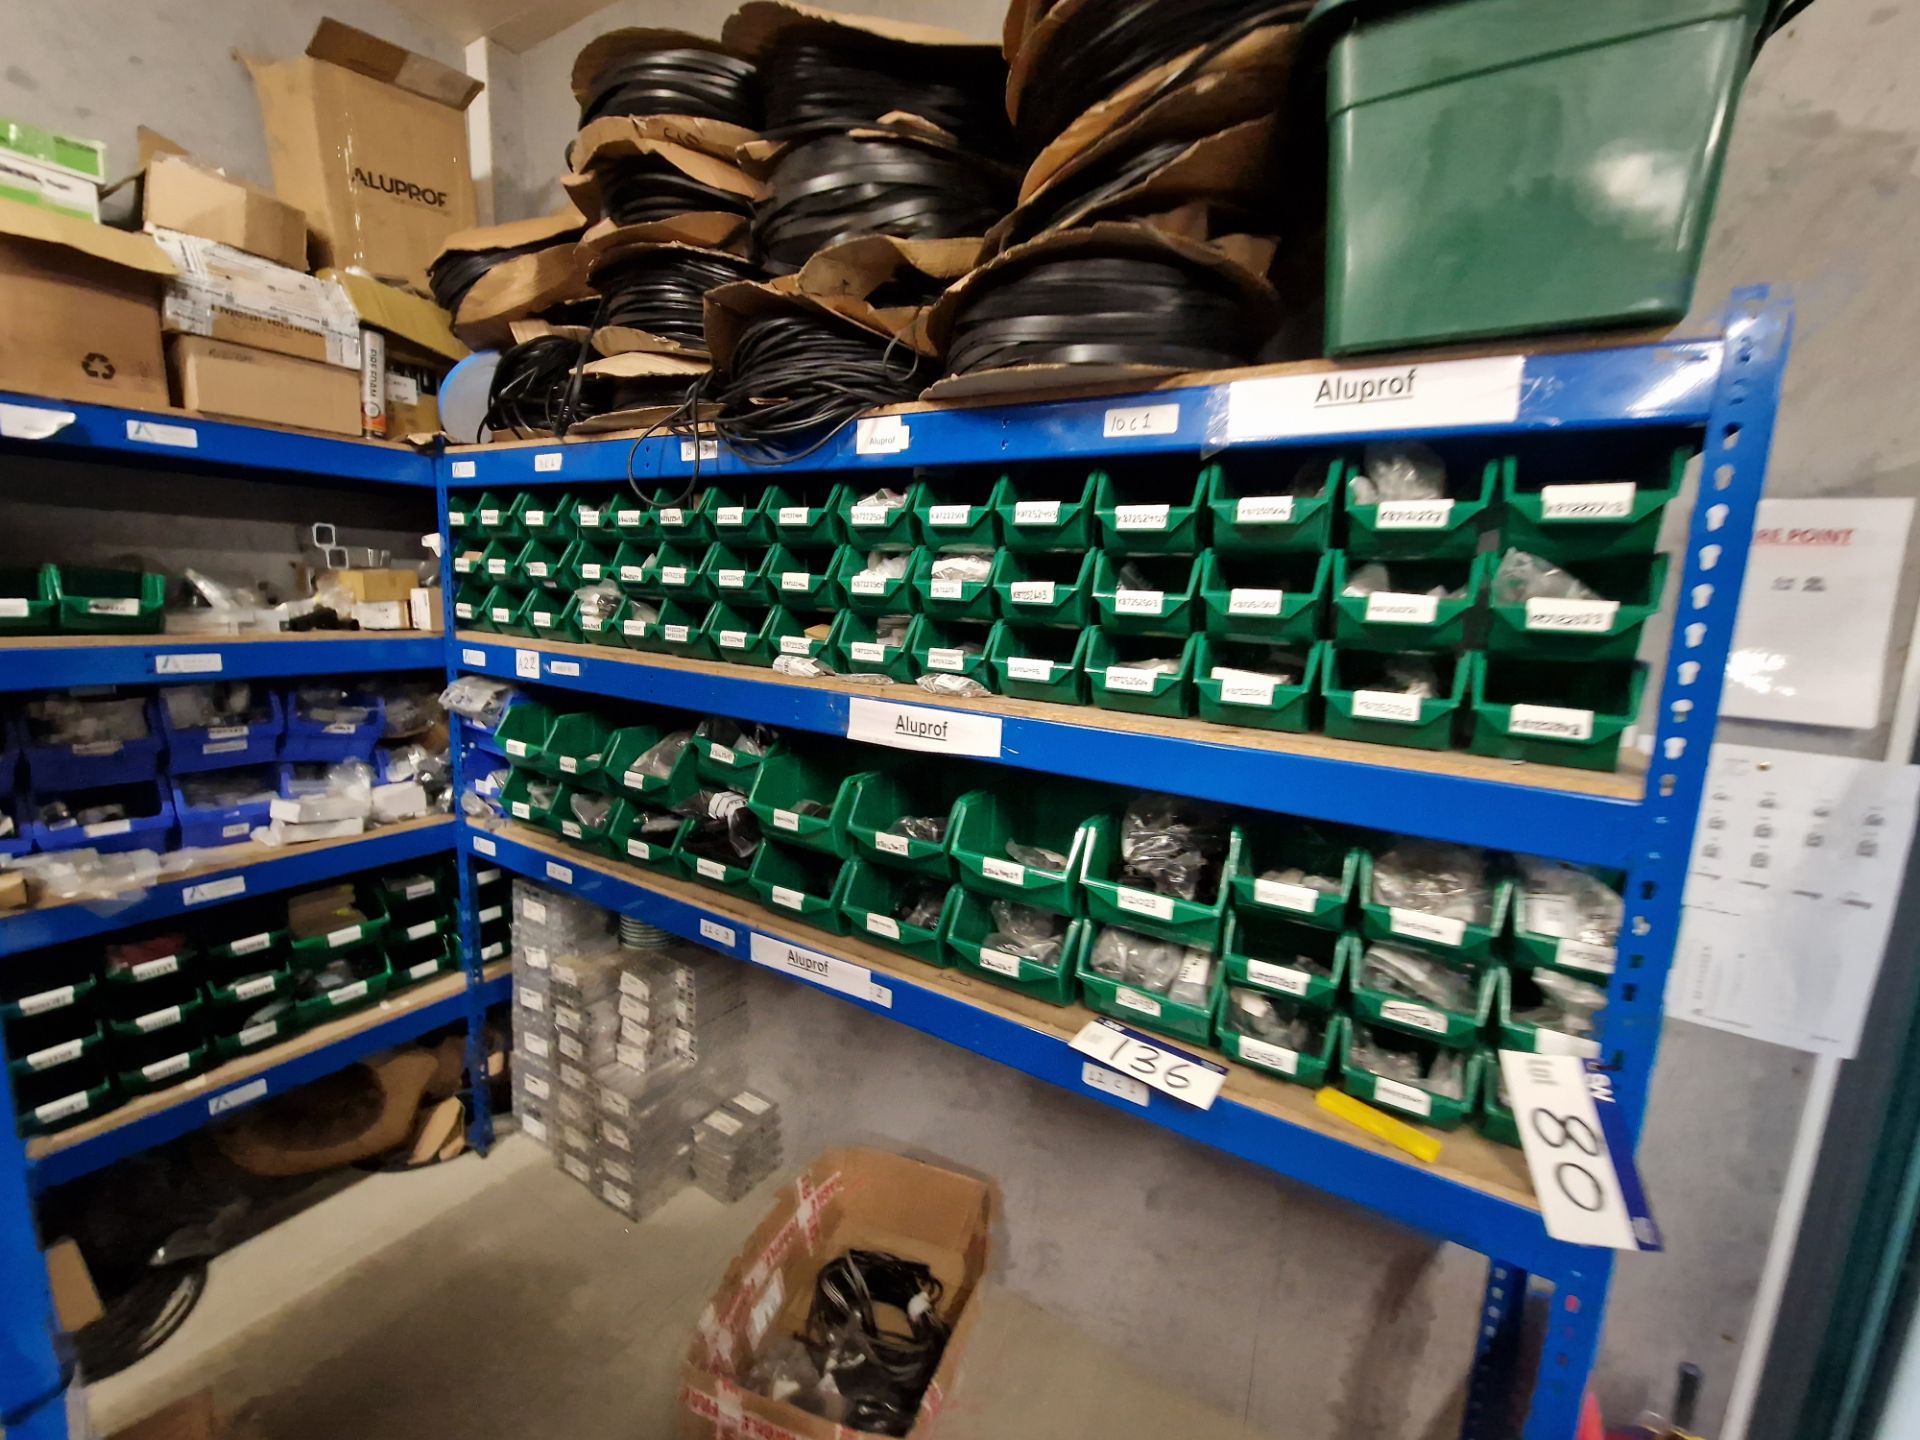 Contents to Four Bays of Shelving, including Rubber Gaskets, Aluminium Profile, End Caps, Screws,